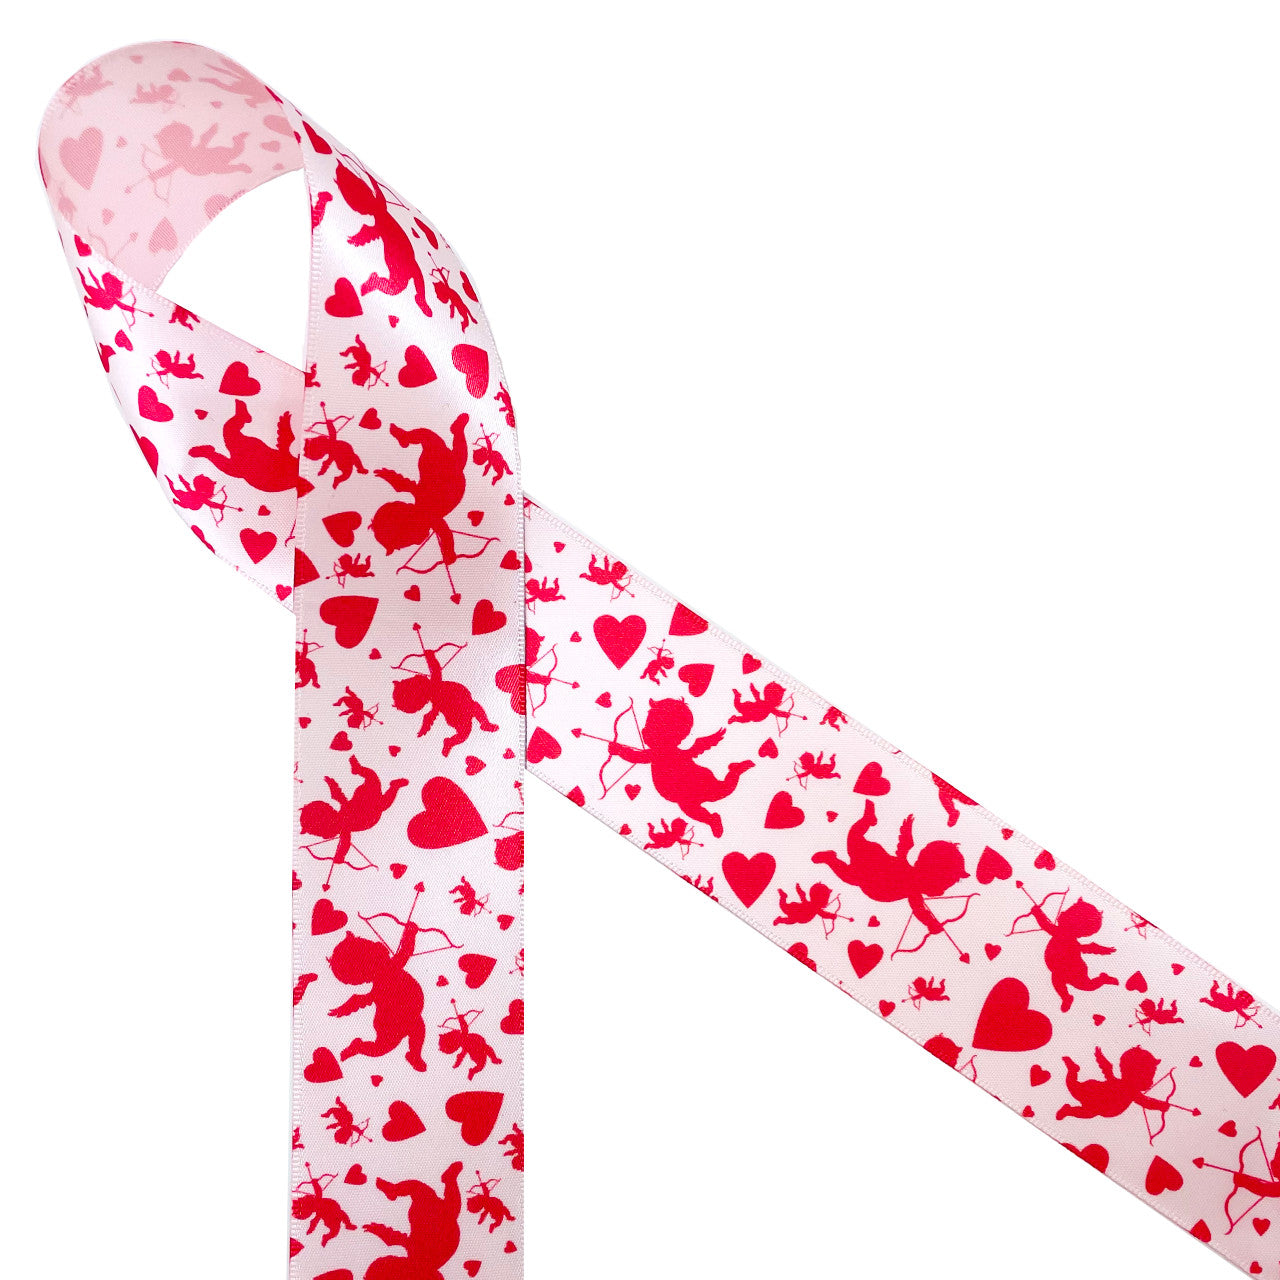 Cupid is aiming his arrows at hearts large and small creating Valentine fun!  Be sure to have this ribbon on hand for Valentine parties, favors, gifts, cookies, candy tables and cake pops! This adorable ribbon is printed in red on 5/8" pink single face satin ribbon.